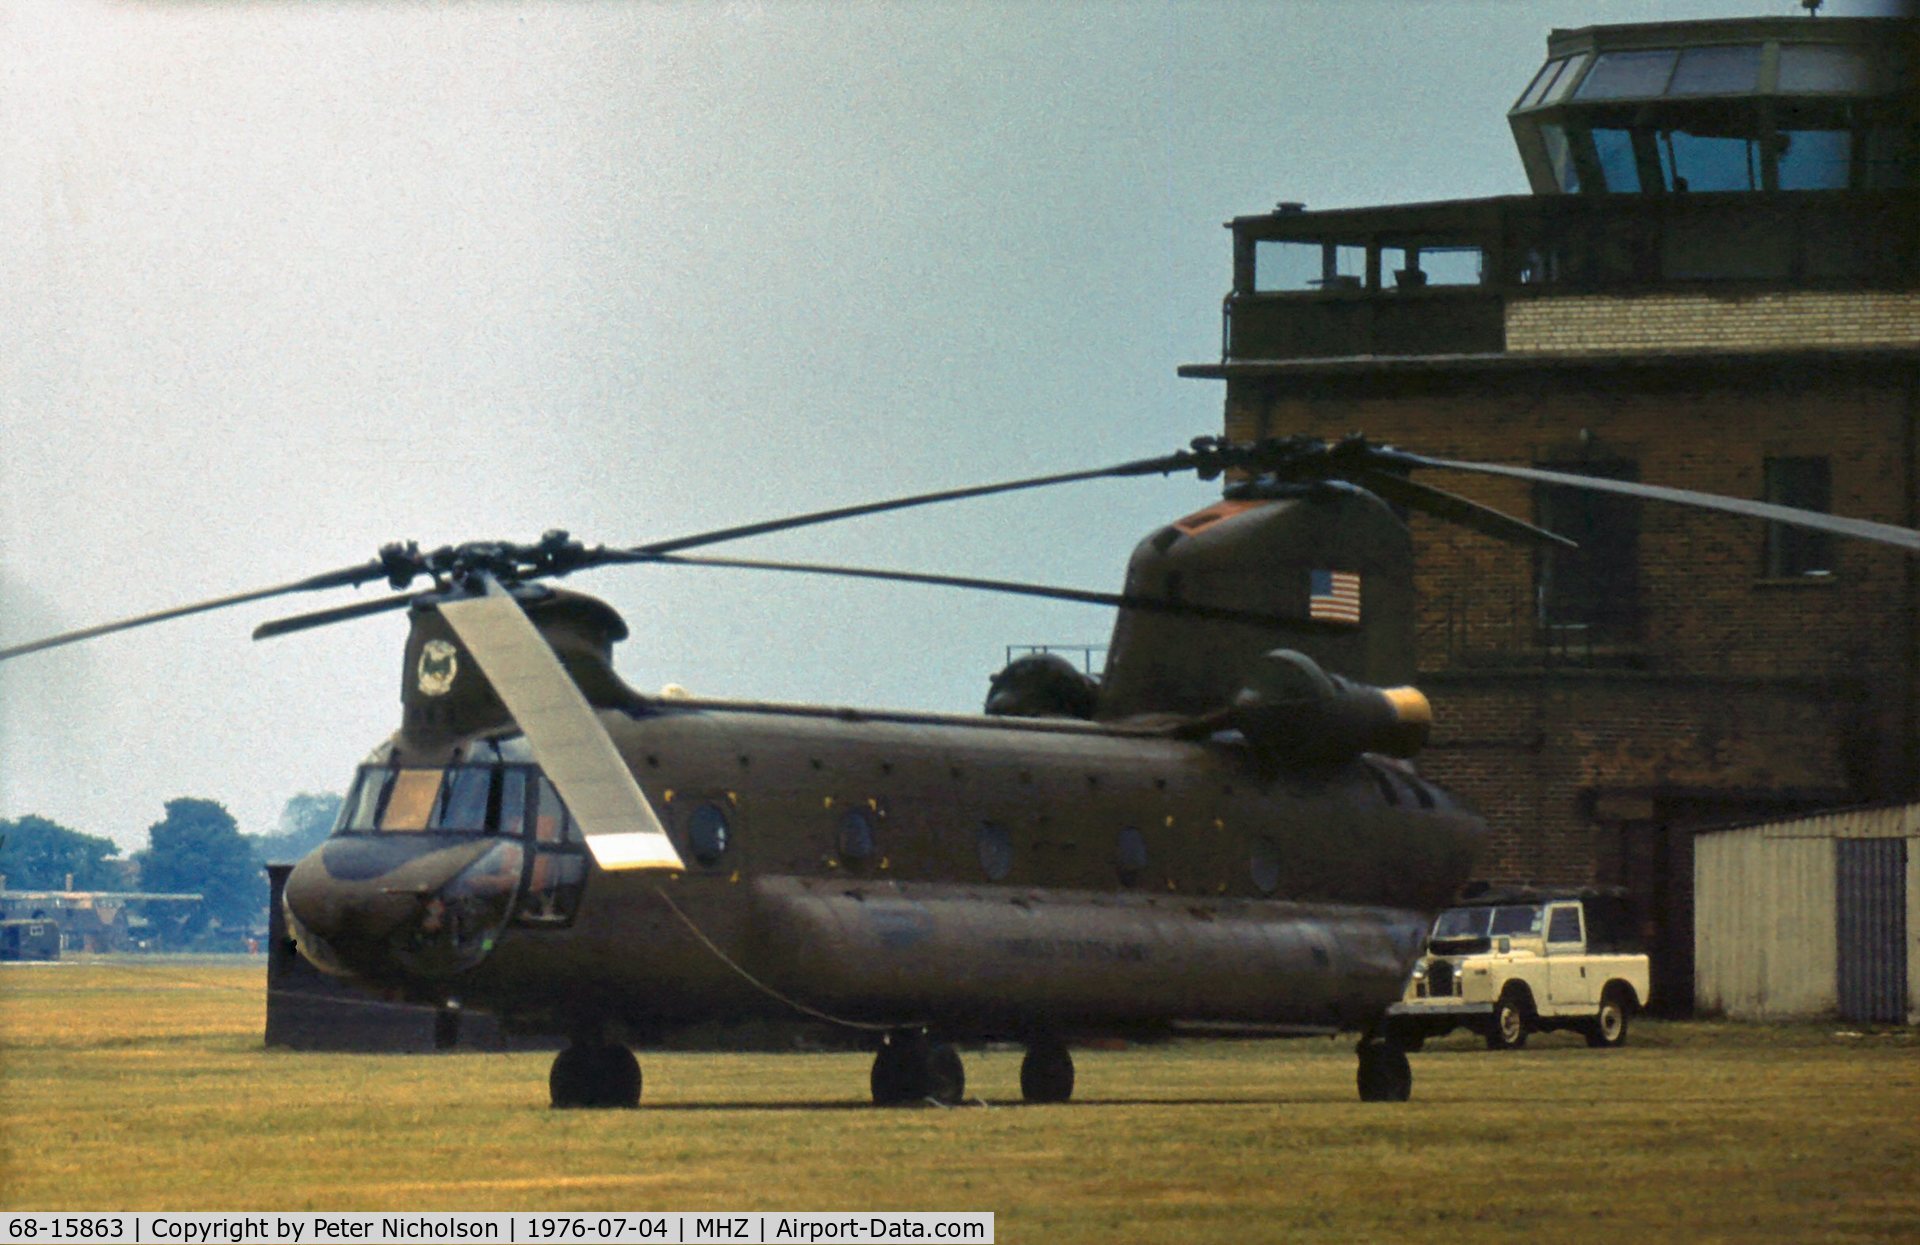 68-15863, 1968 Boeing Vertol CH-47C Chinook C/N B.575, CH-47C Chinook of the US Army's 180th Aviation Company at the 1976 Mildenhall Air Fete.